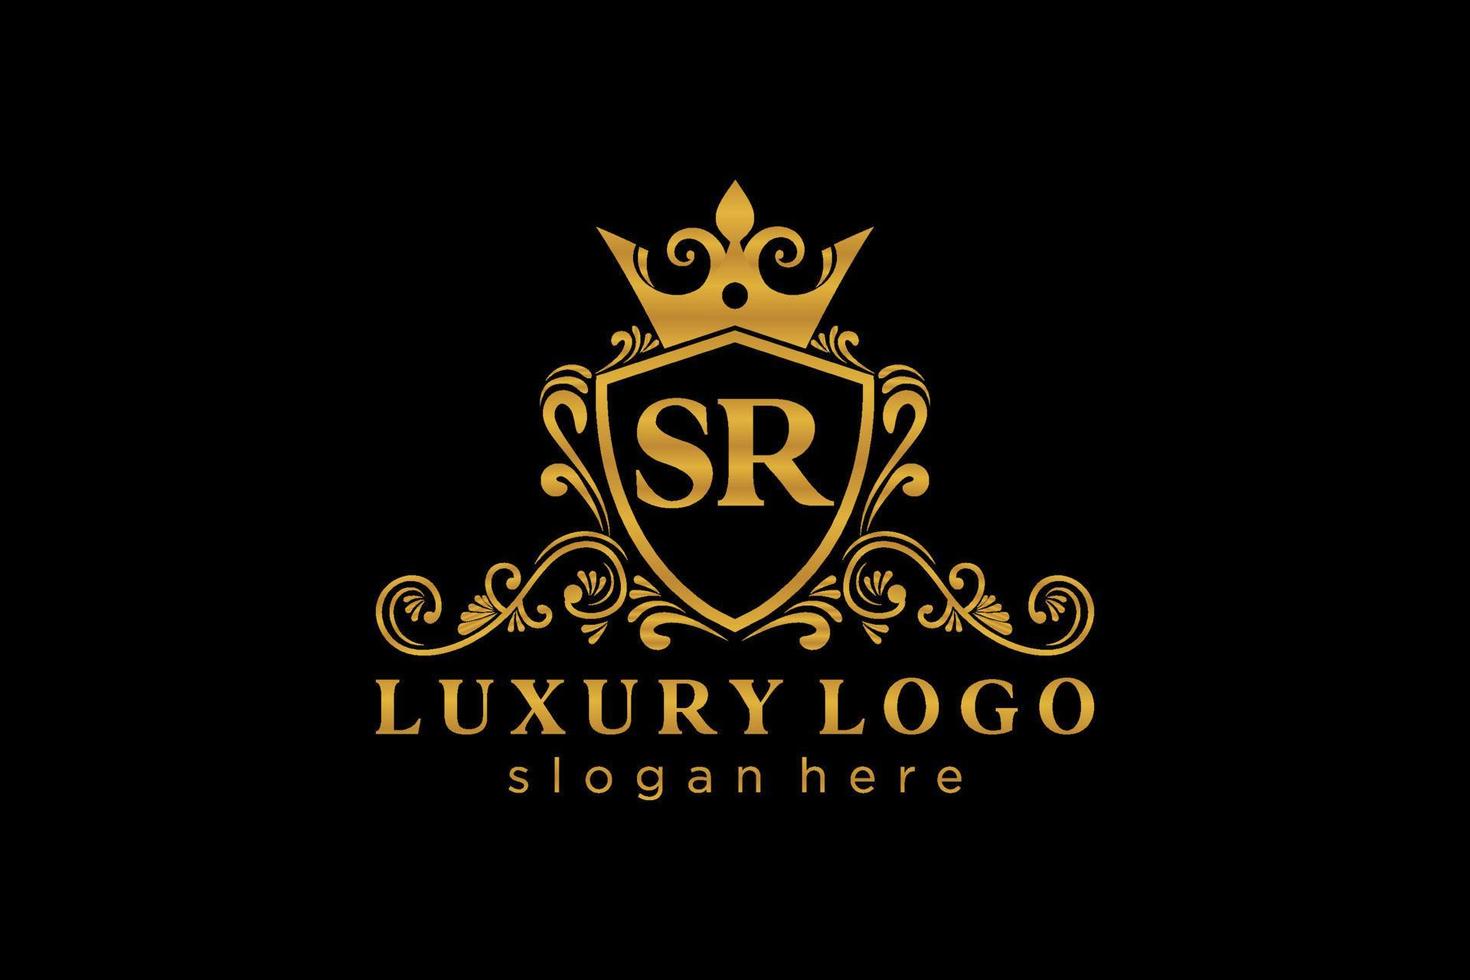 Initial SR Letter Royal Luxury Logo template in vector art for Restaurant, Royalty, Boutique, Cafe, Hotel, Heraldic, Jewelry, Fashion and other vector illustration.